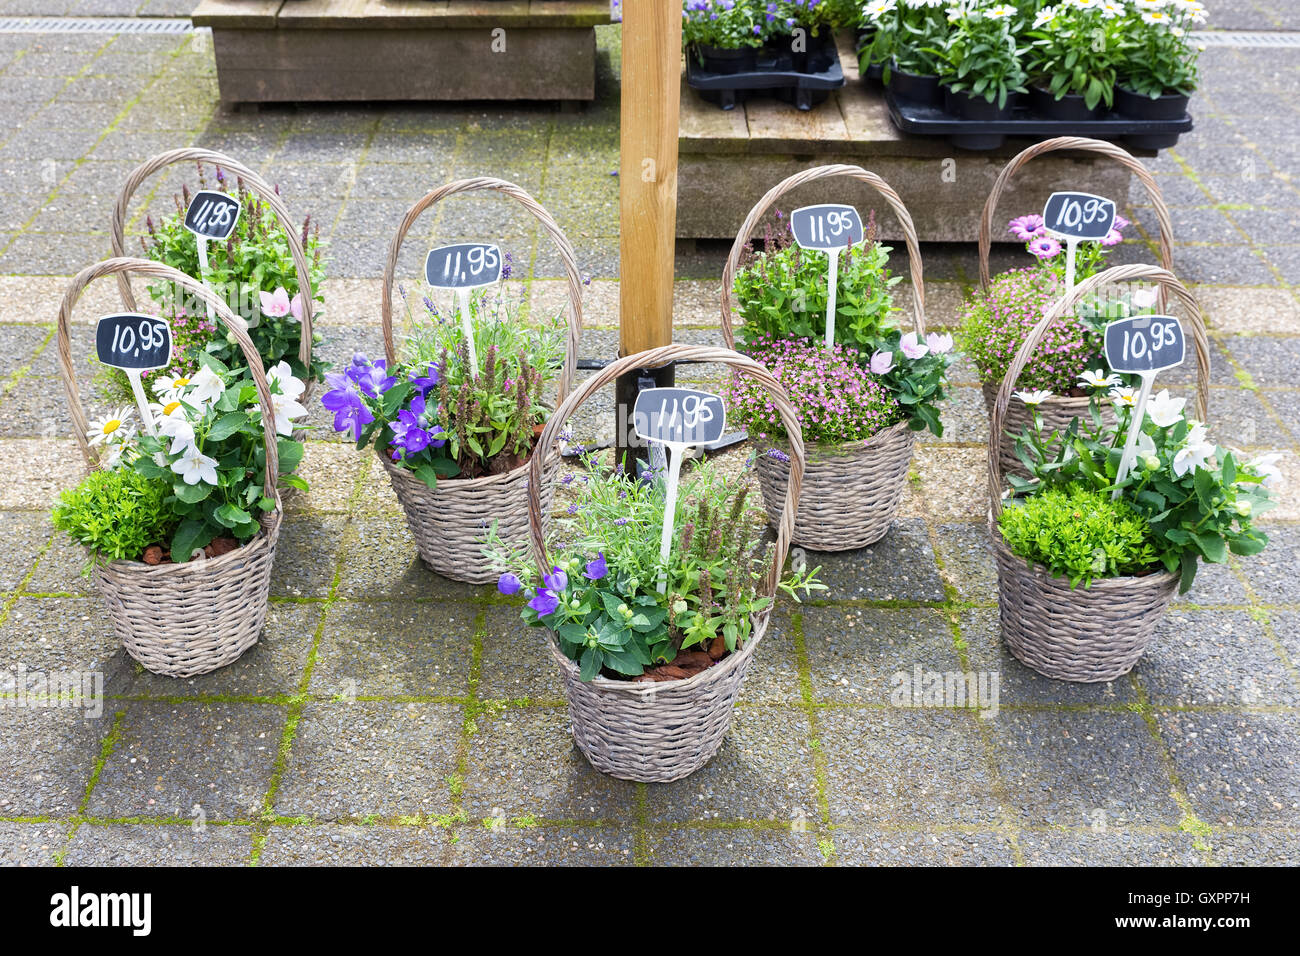 Various reed baskets with flowering plants on ground Stock Photo